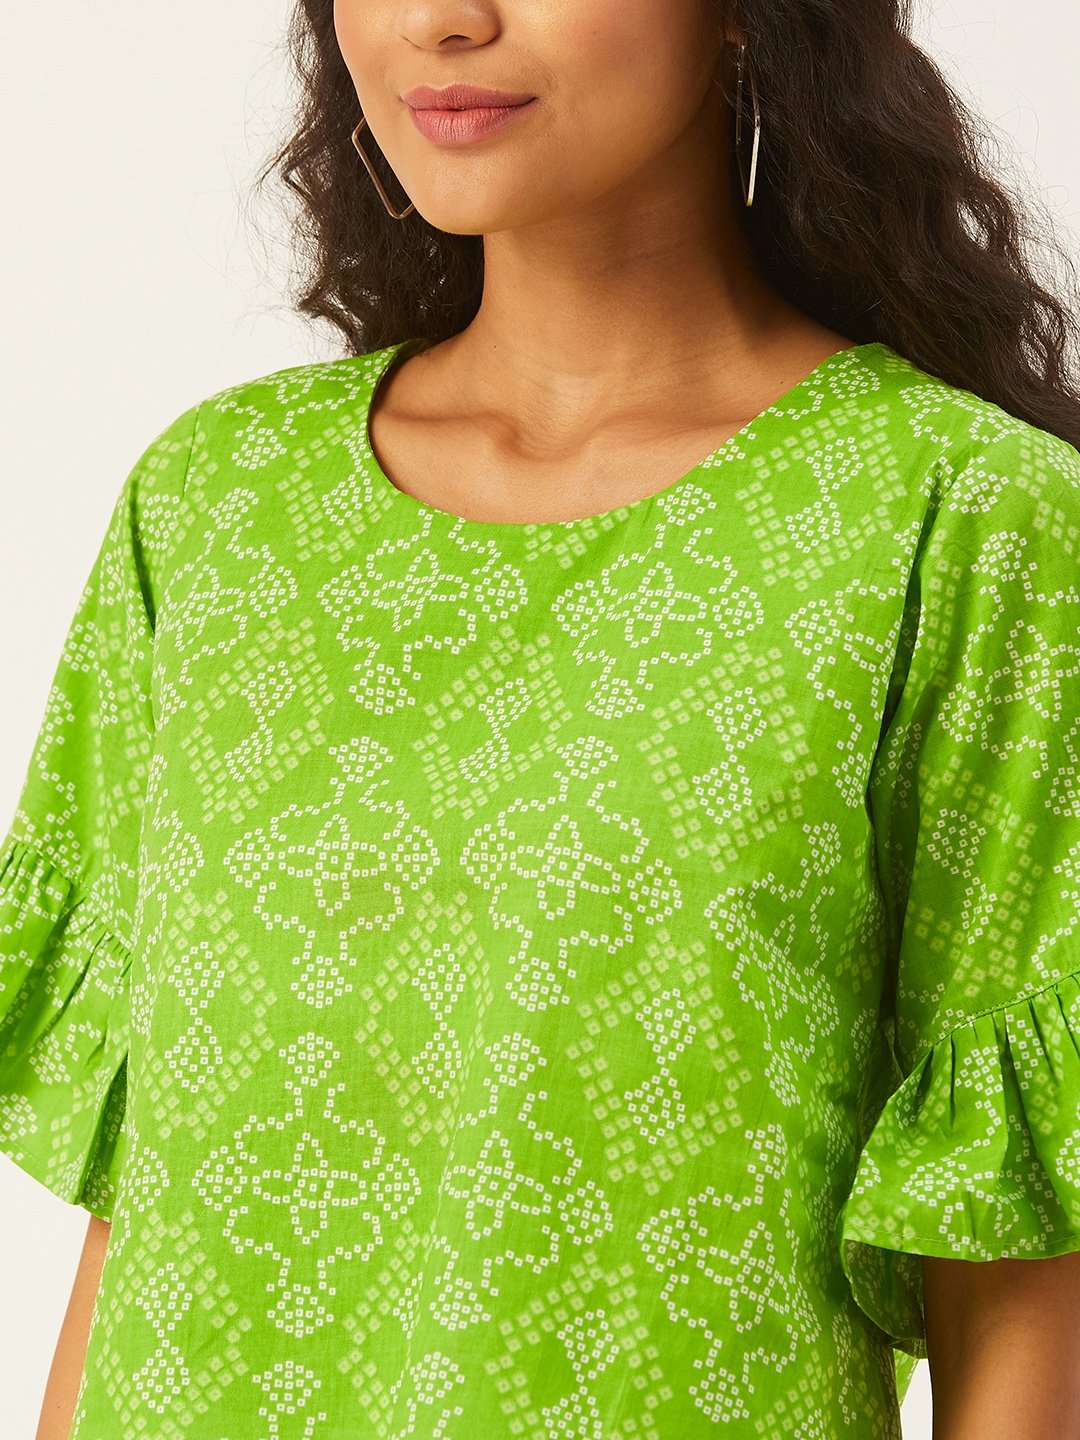 Green Bandhani Top With Frill Sleeve